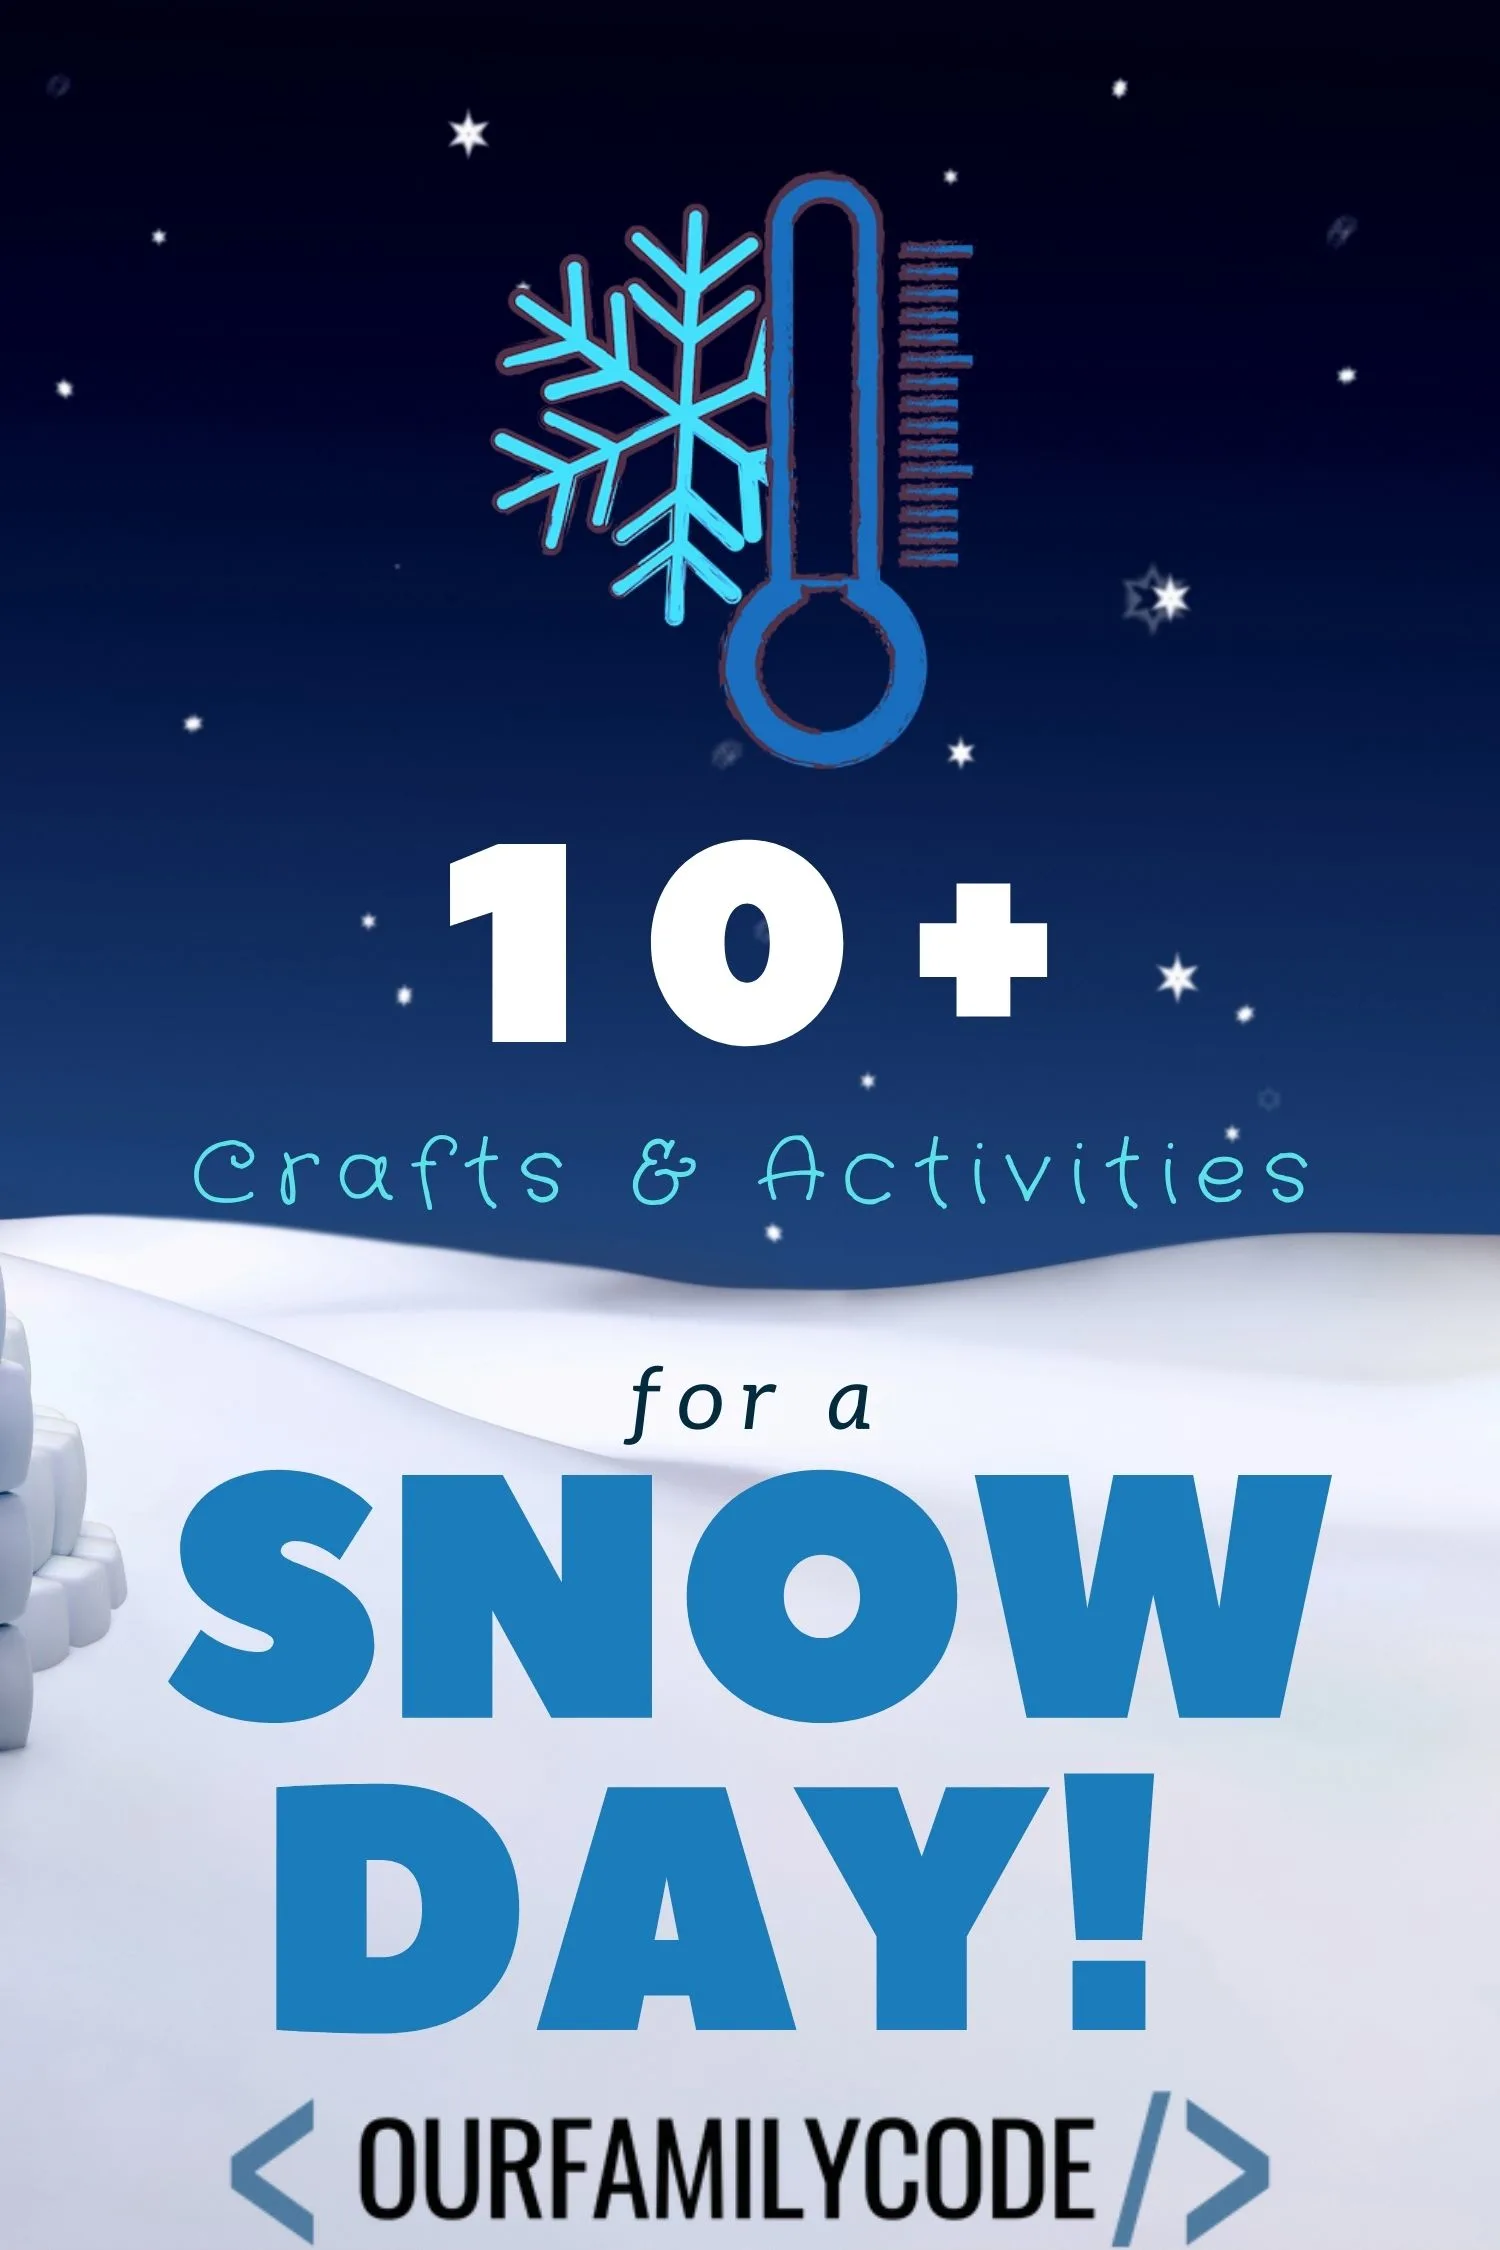 Check out these great snow day crafts for kids and winter activities to keep the kids warm and entertained this winter season while also keeping your sanity! #kidscrafts #snowday #homeschool #toddleractivities